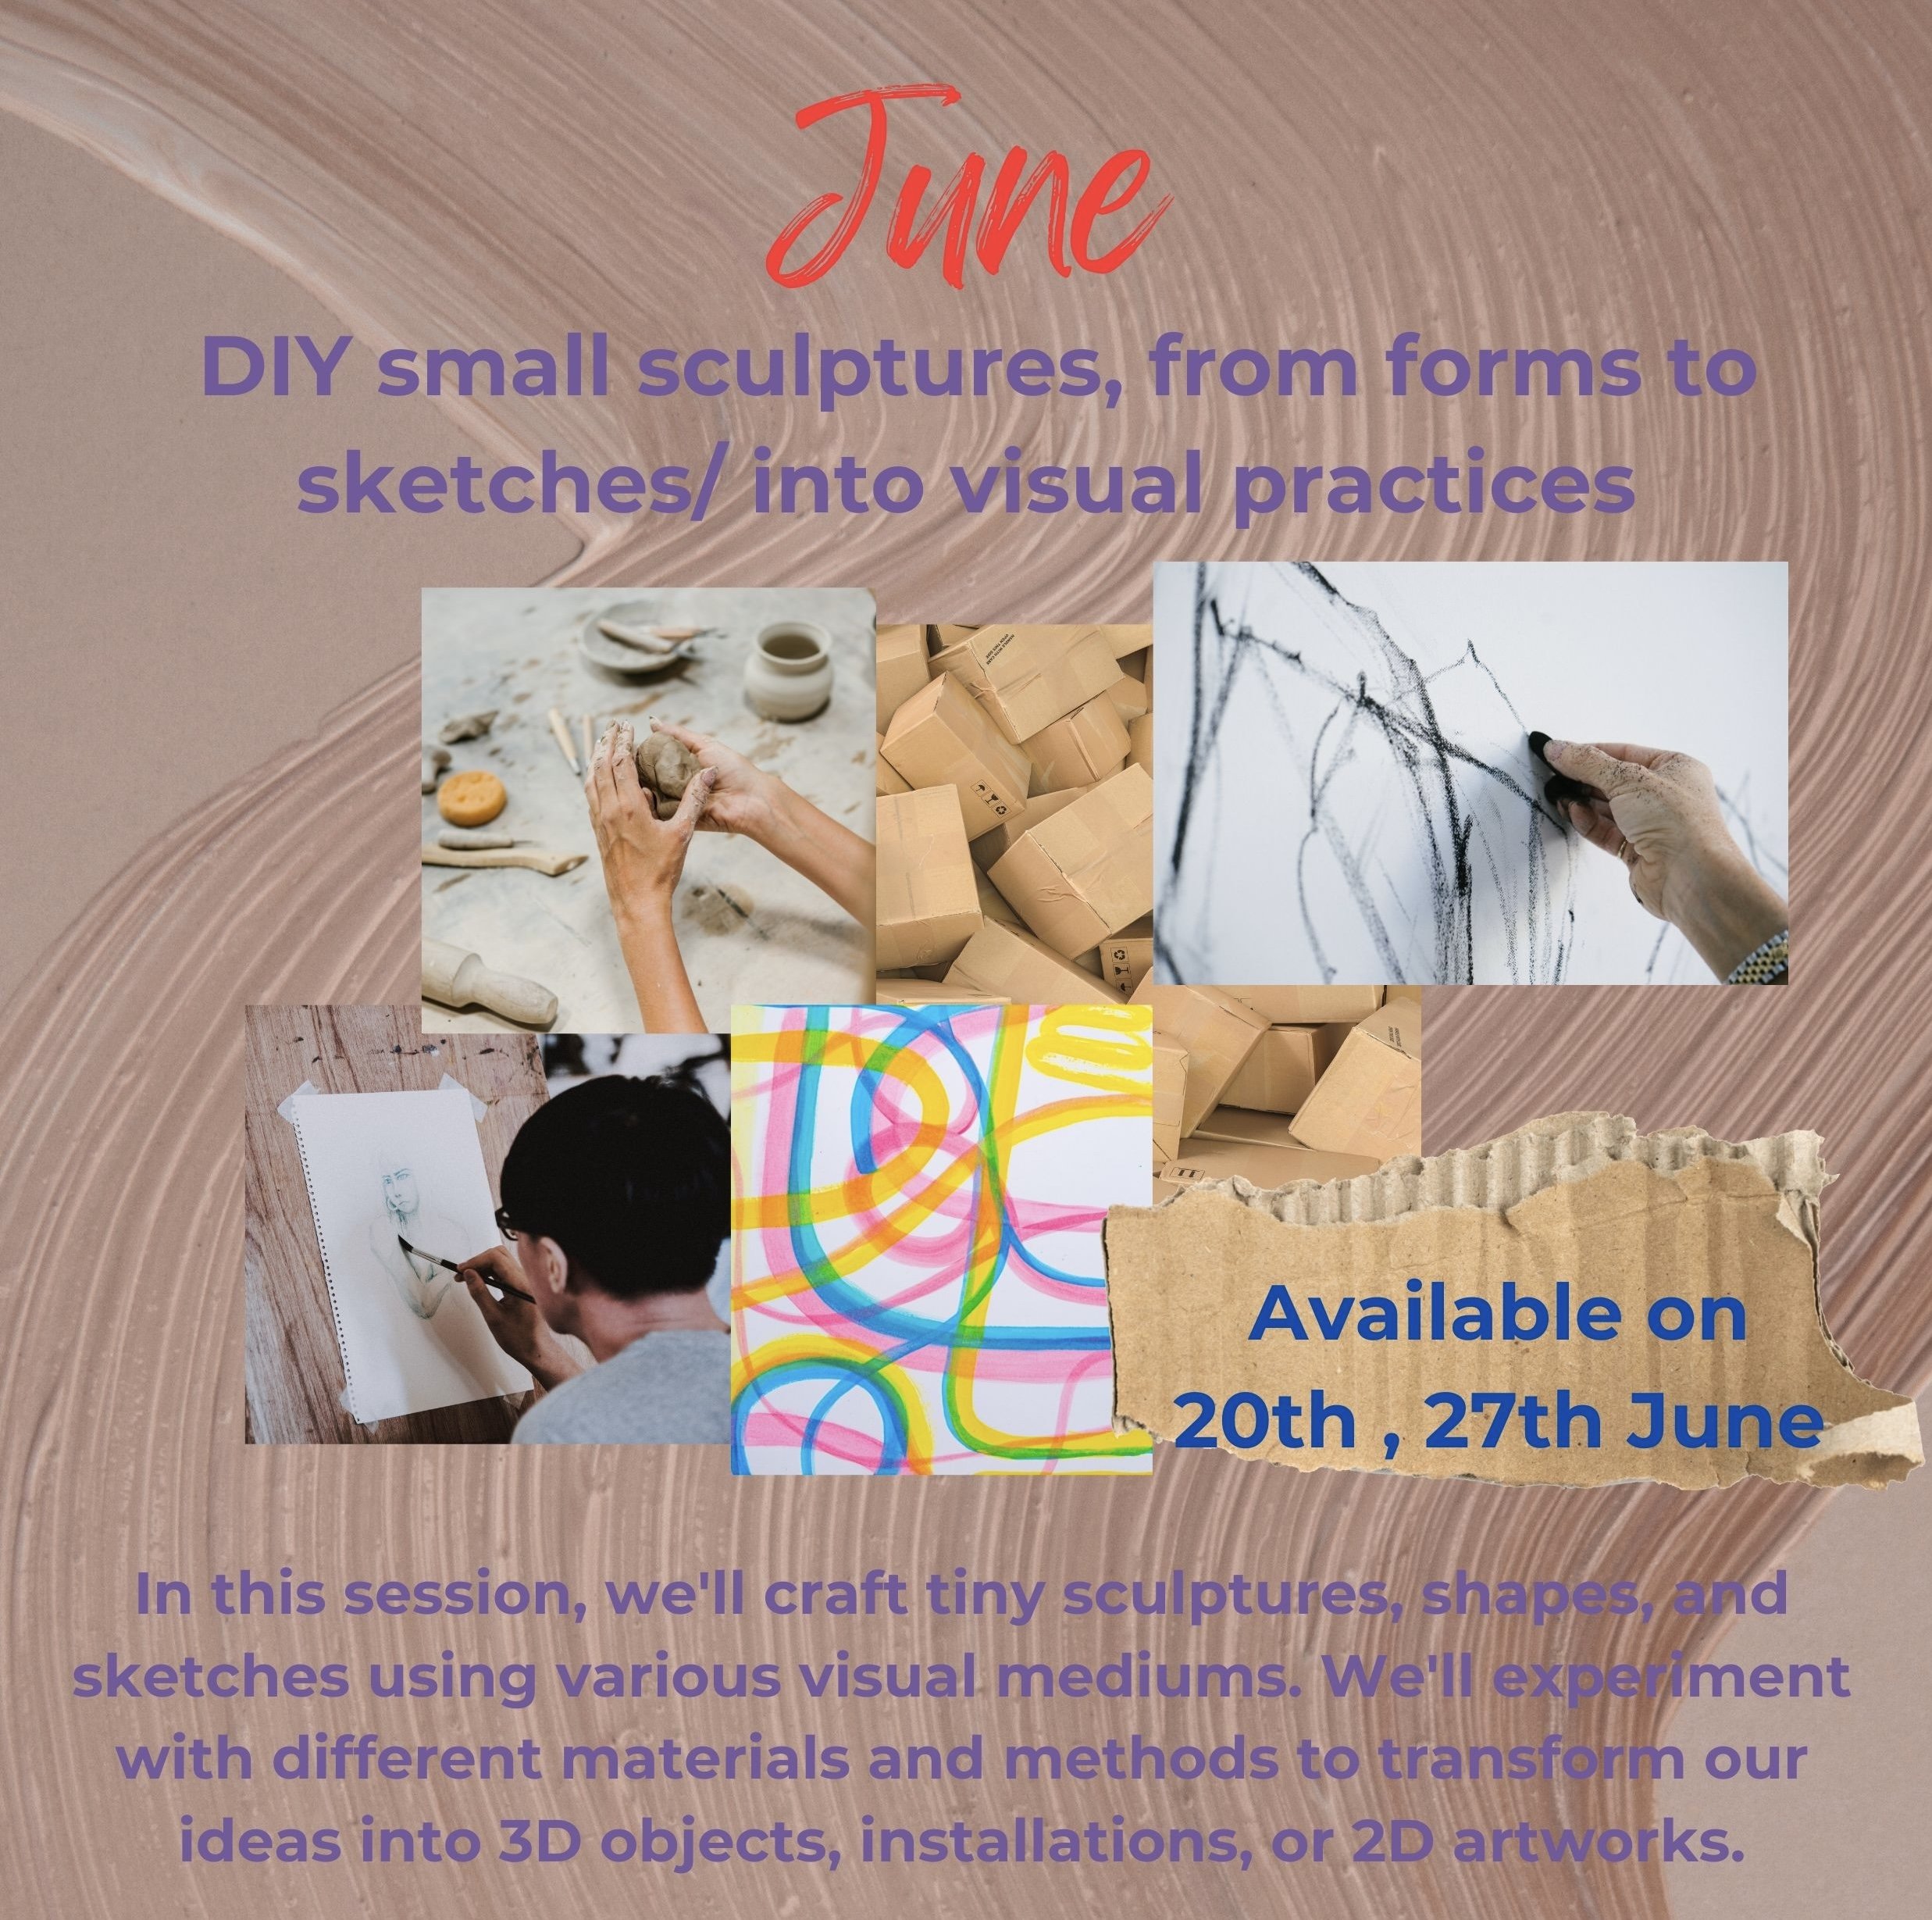 DIY small sculptures, from forms to sketches/ into visual practices